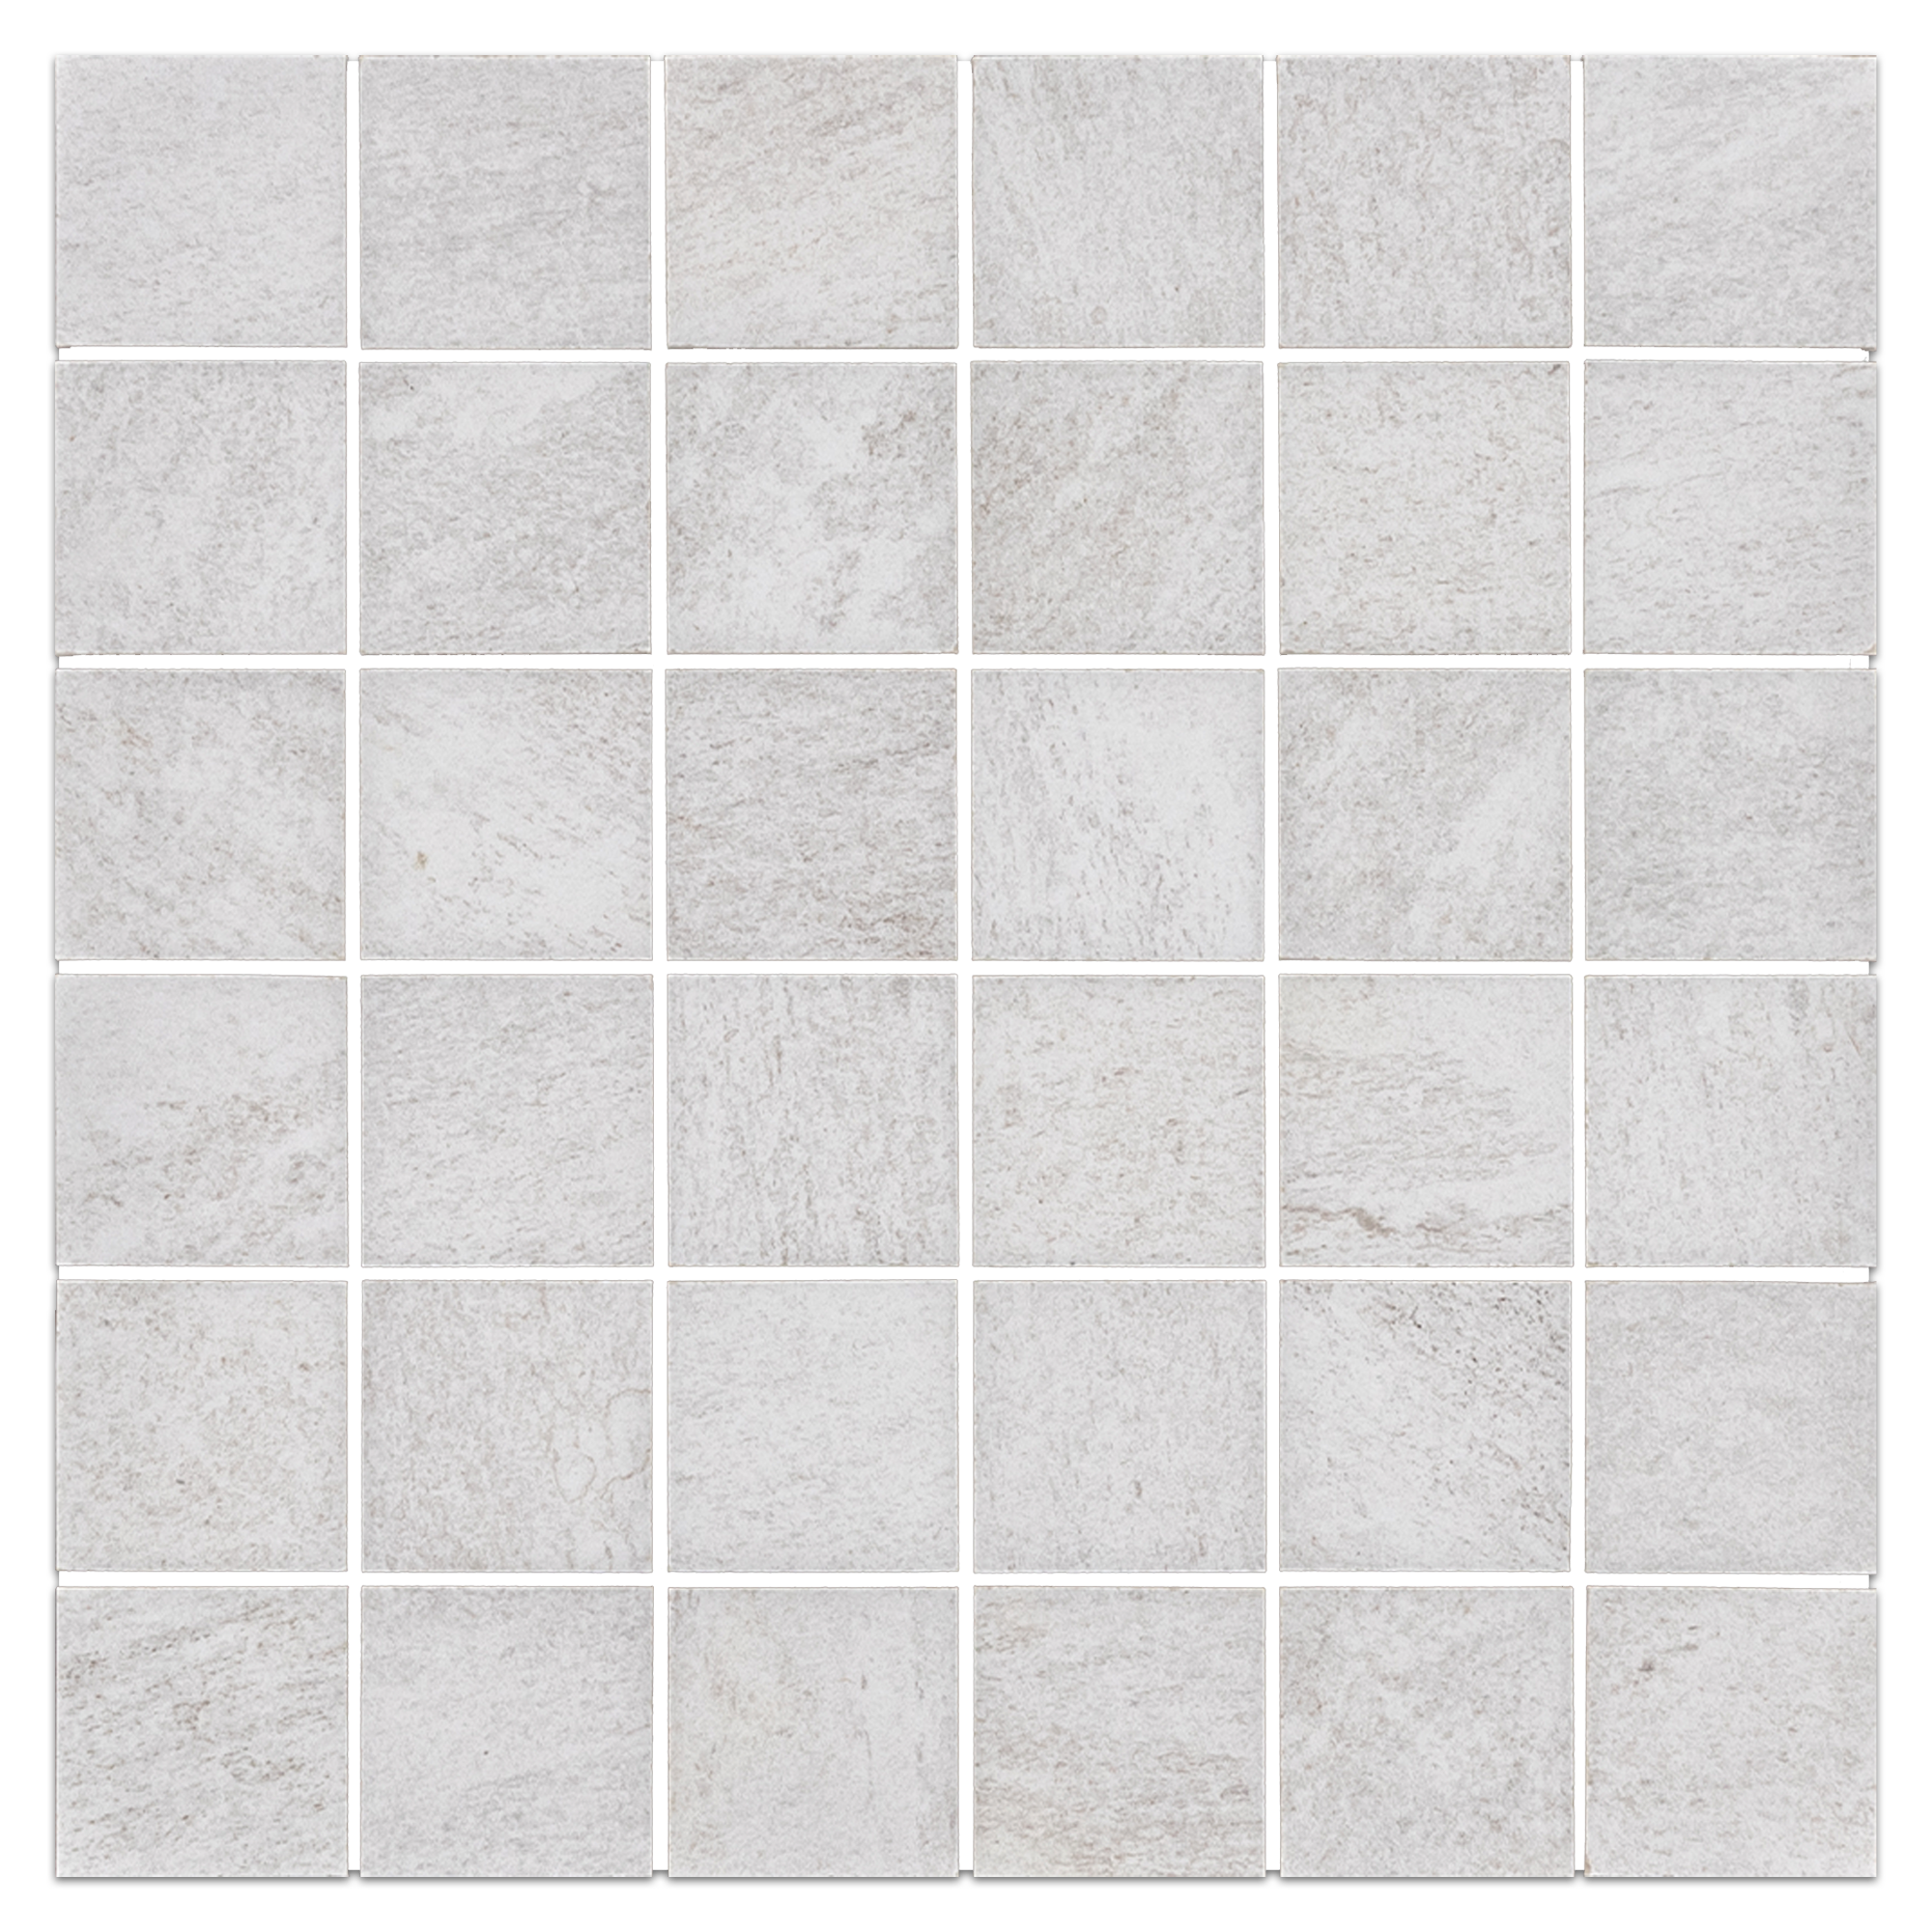 Elon Ecostone White Porcelain 2x2 Straight Stack Field Mosaic 12x12x9mm Natural SP144 Surface Group International Product